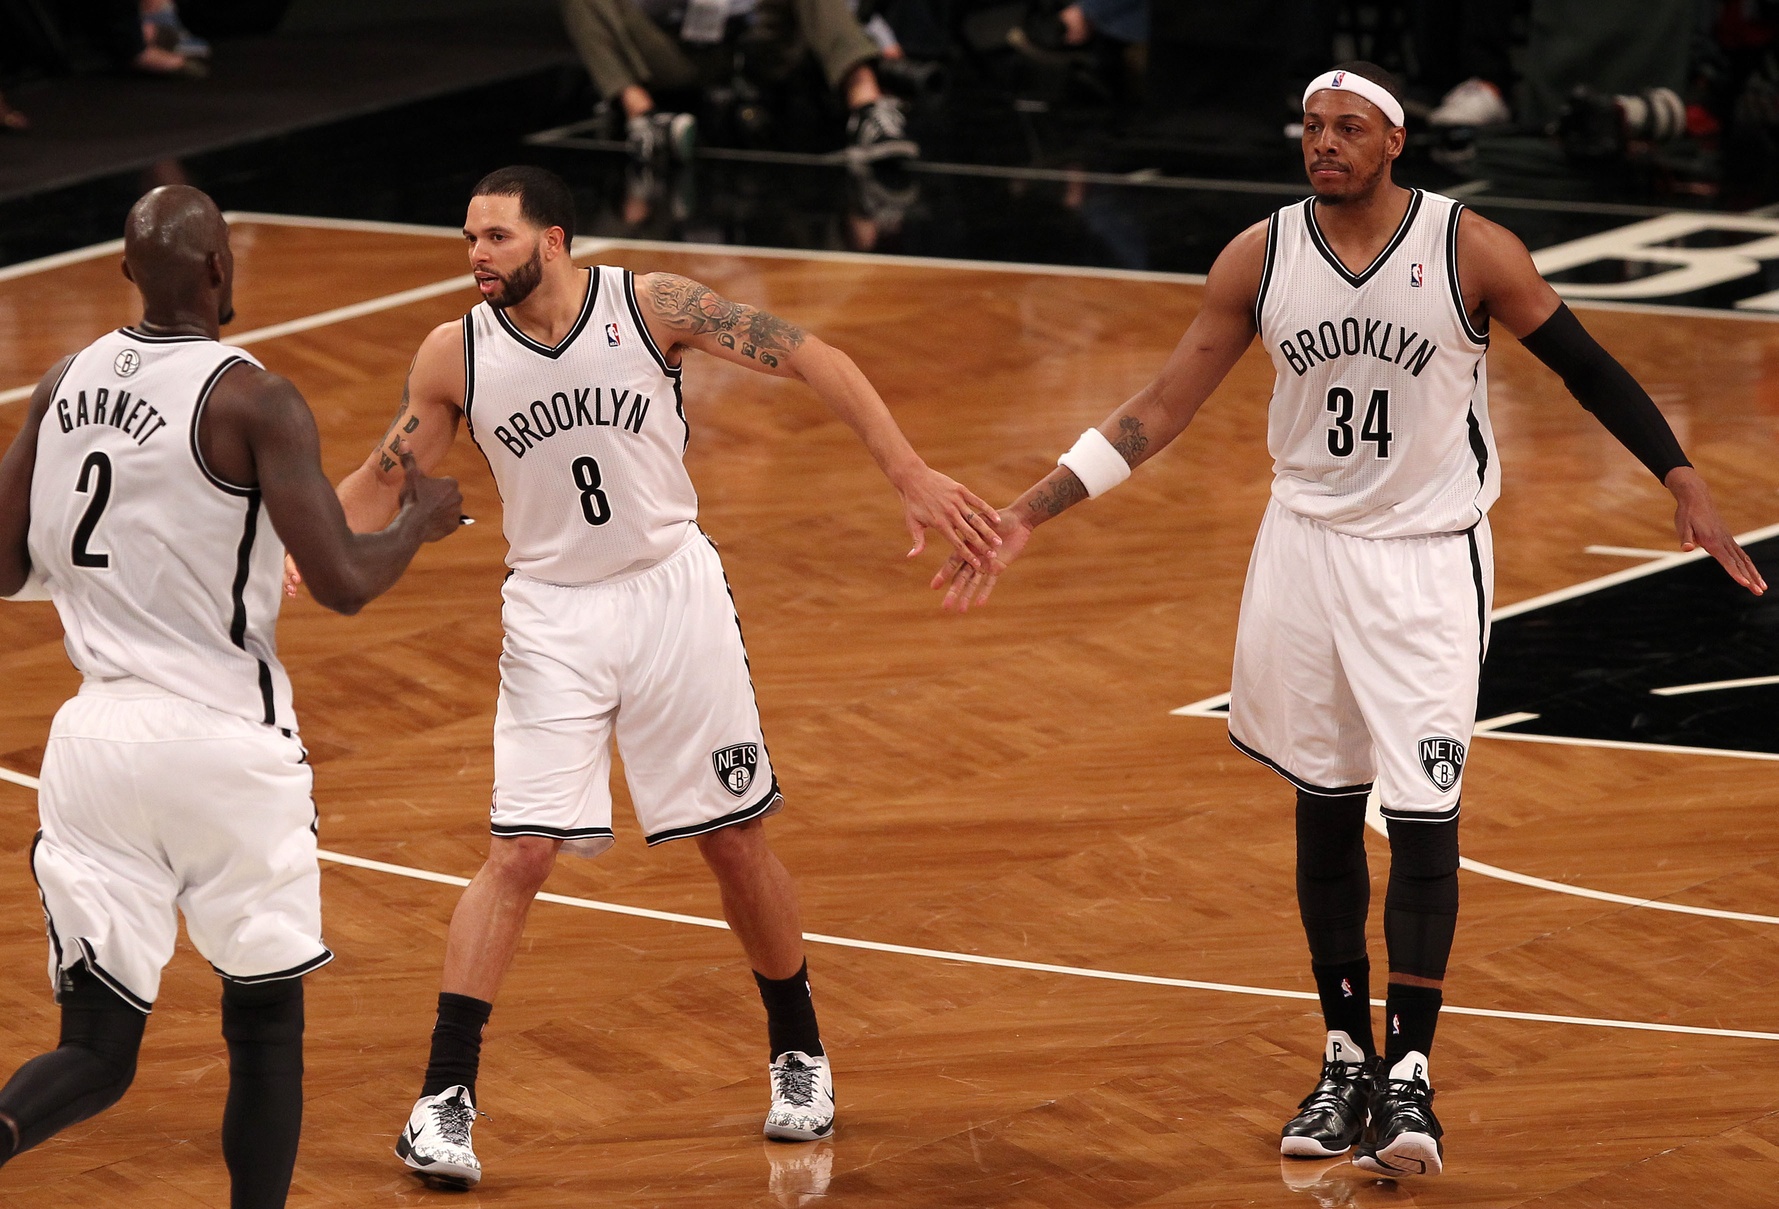 Can the Nets beat the Heat? Photo via Adam Hunger, USA Today Sports Images